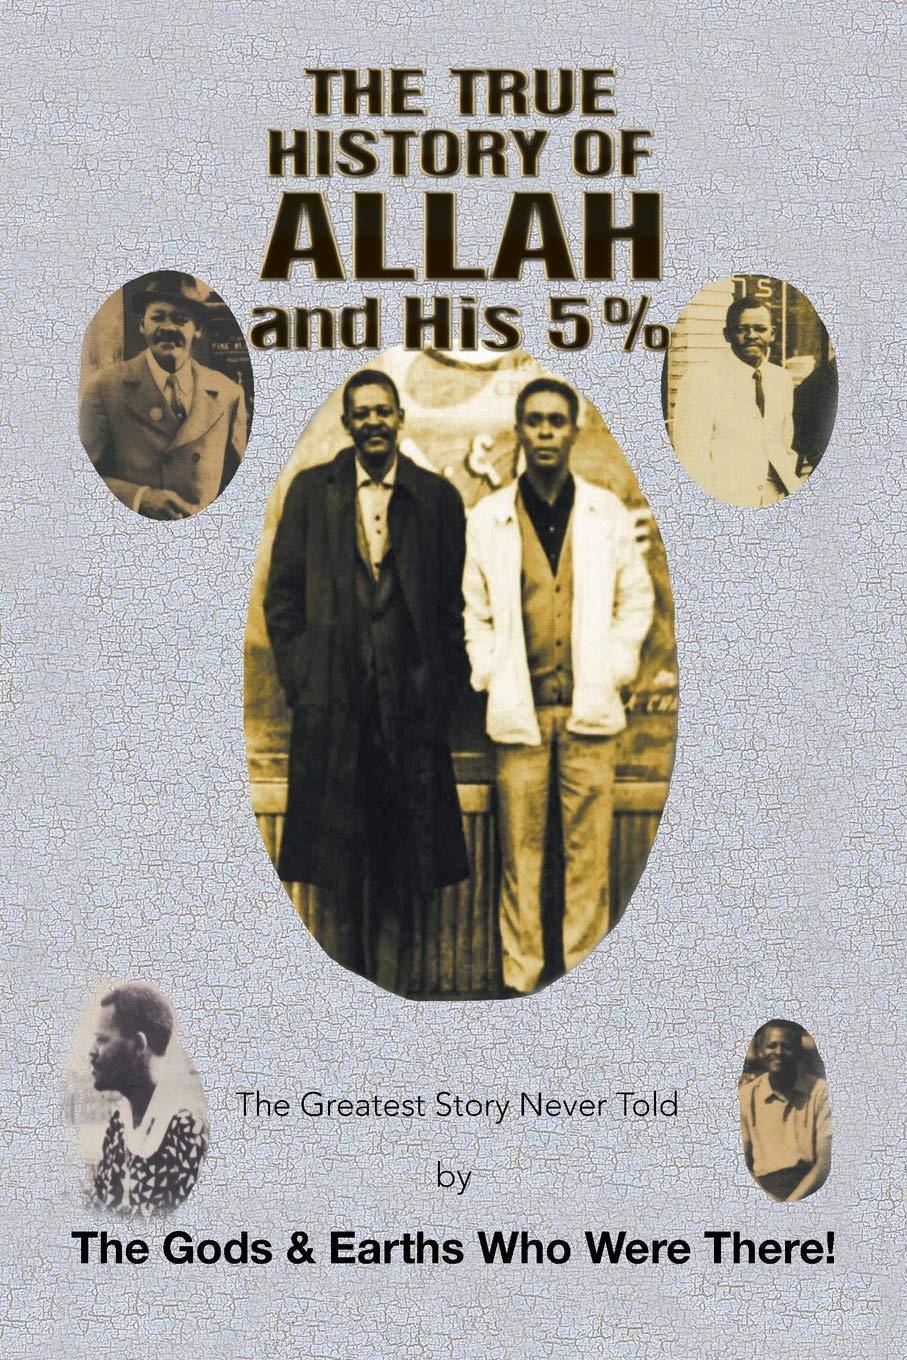 The True History of Allah and His 5% - SureShot Books Publishing LLC